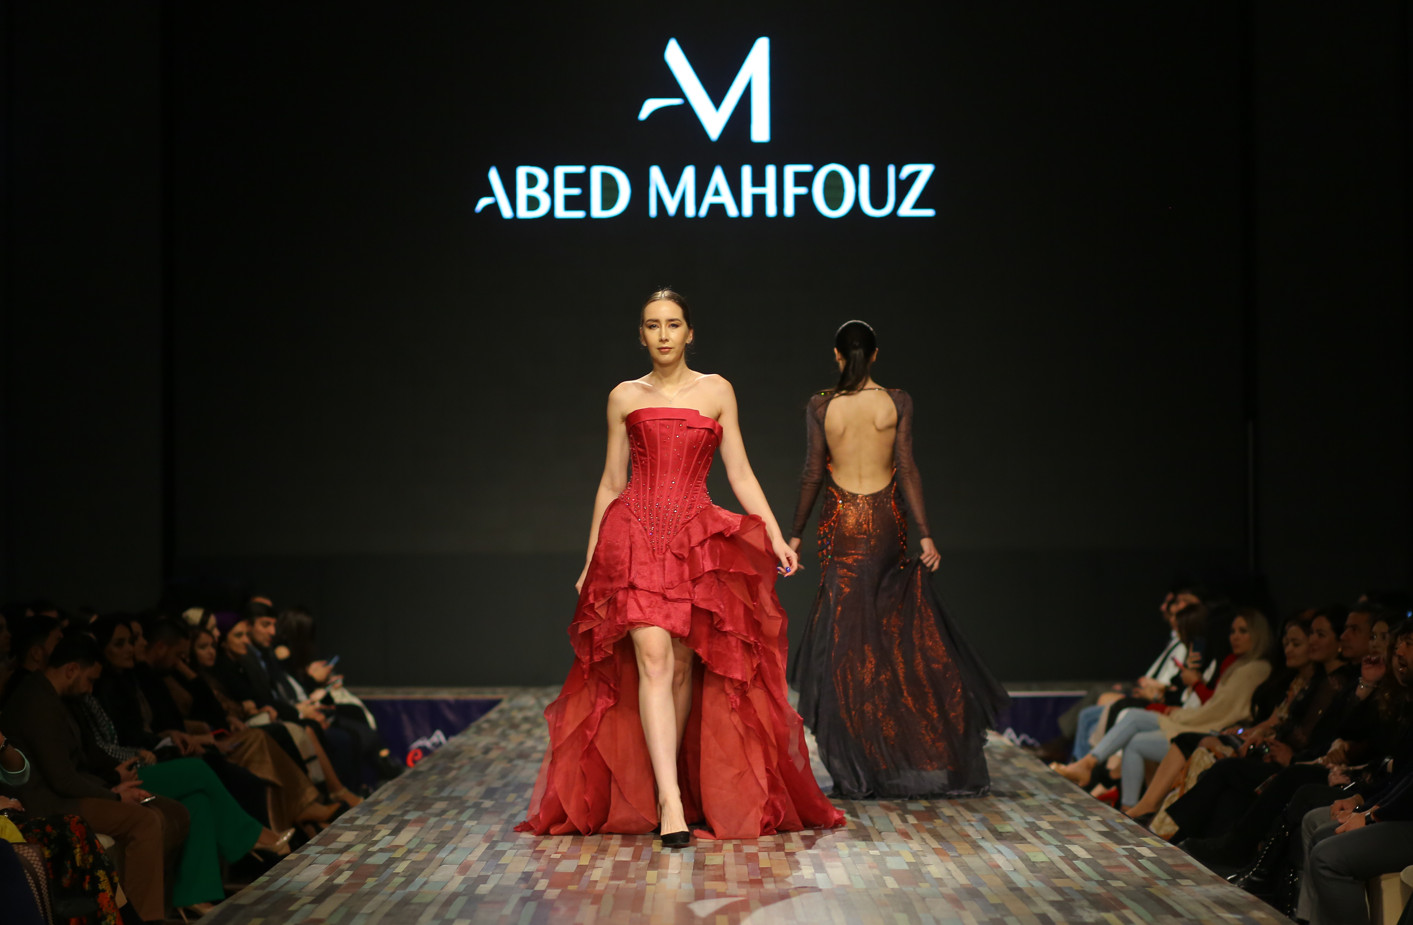 Abed mahfouz “fashion, glamour and excellency during oriental fashion show